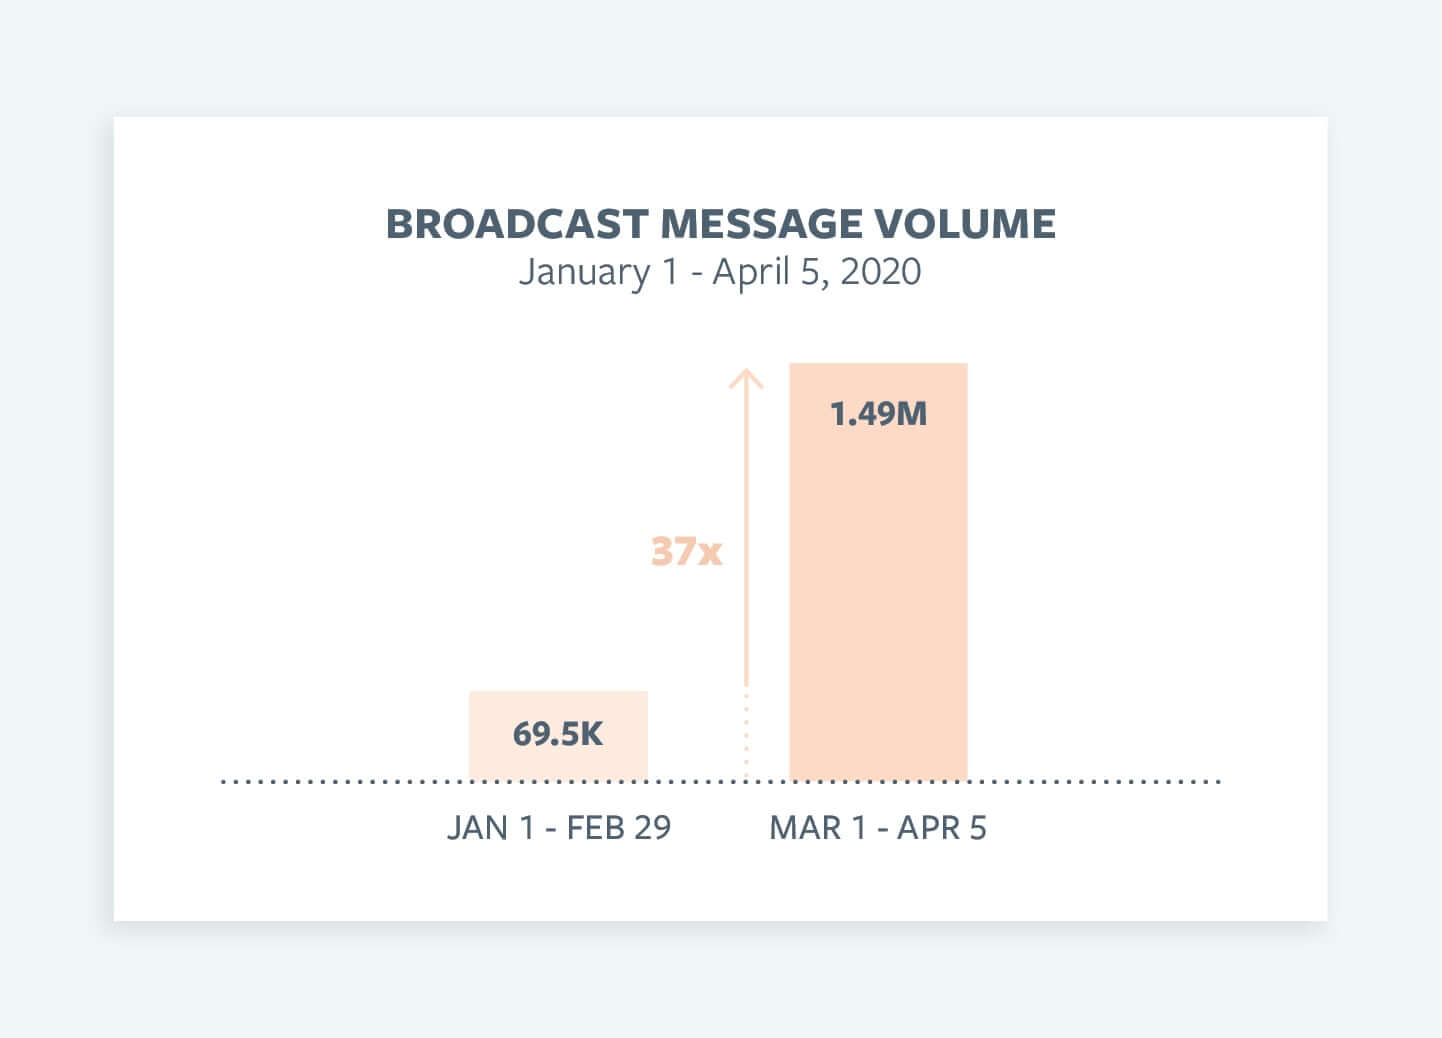 Broadcast message volume from January 1st to April 5th 2020